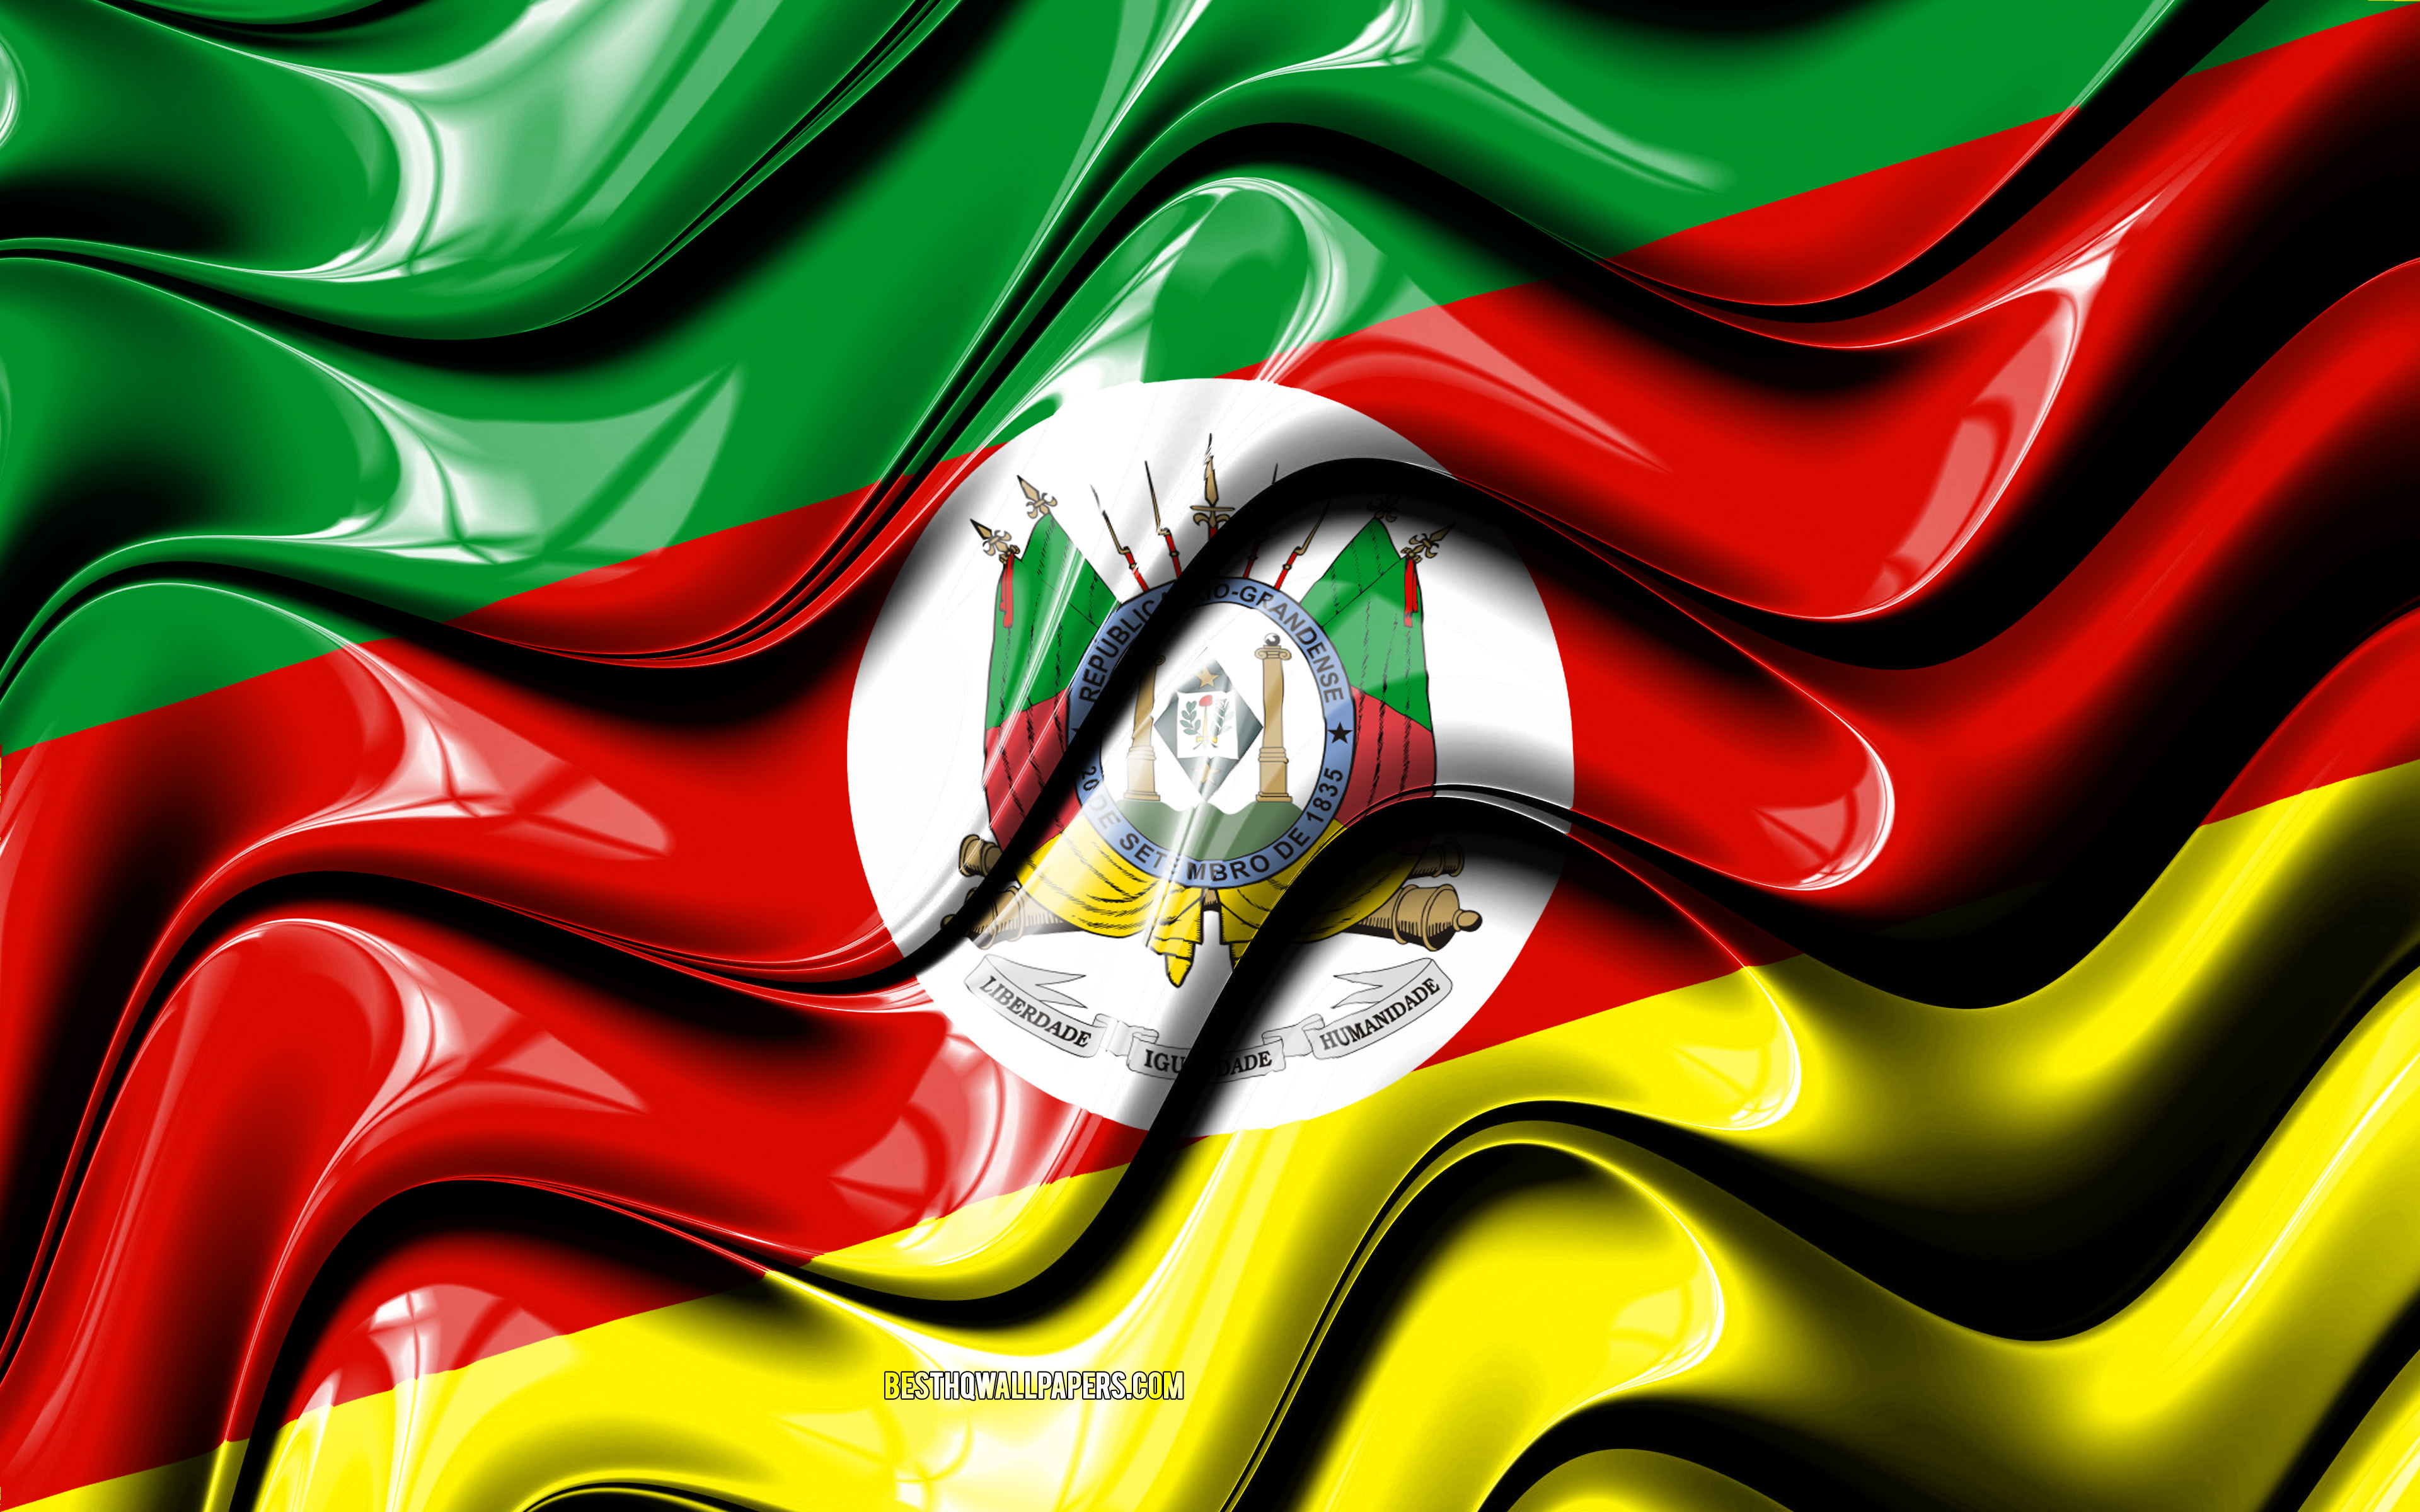 Download wallpaper Rio Grande do Sul flag, 4k, States of Brazil, administrative districts, Flag of Rio Grande do Sul, 3D art, Rio Grande do Sul, brazilian states, Rio Grande do Sul 3D